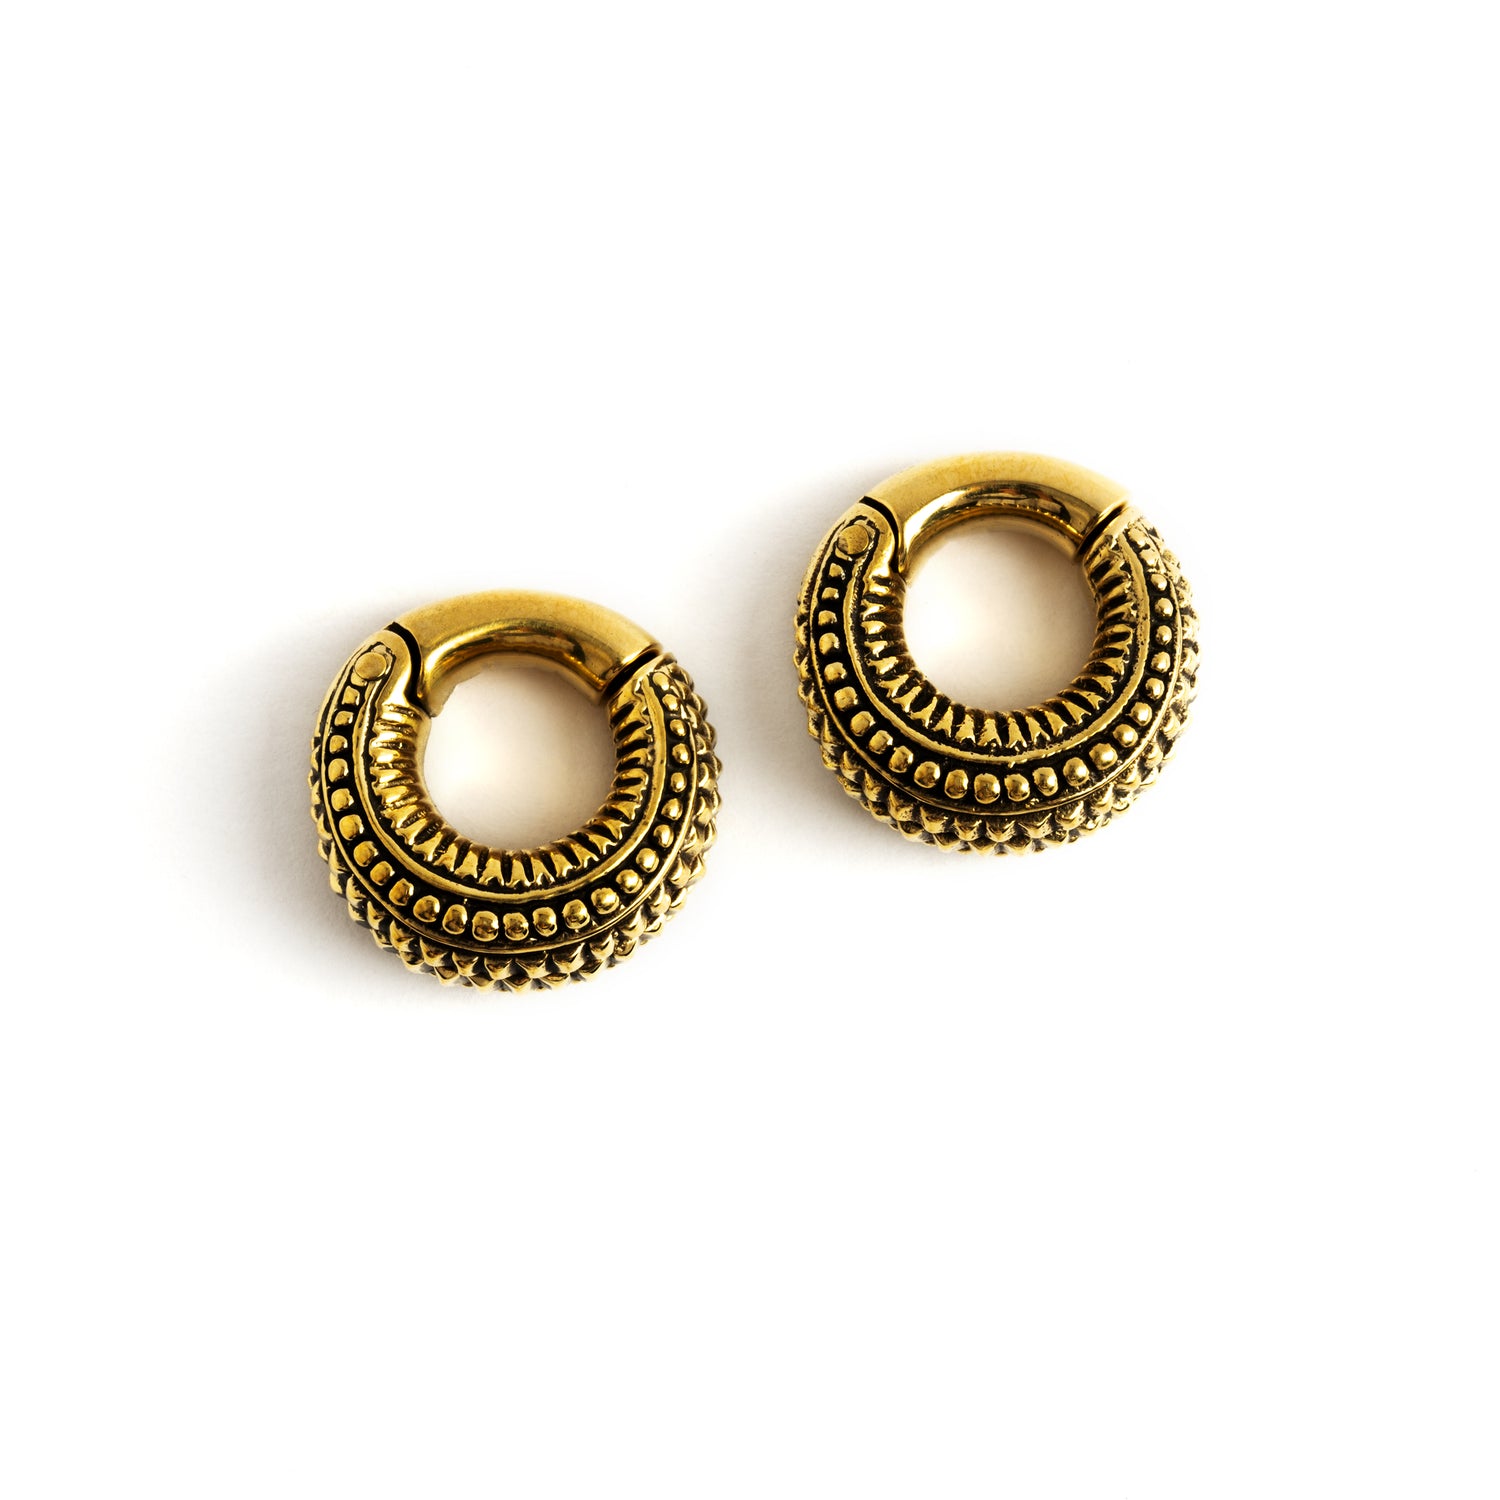 pair of 6g gold brass tribal ear weights hoops frontal view